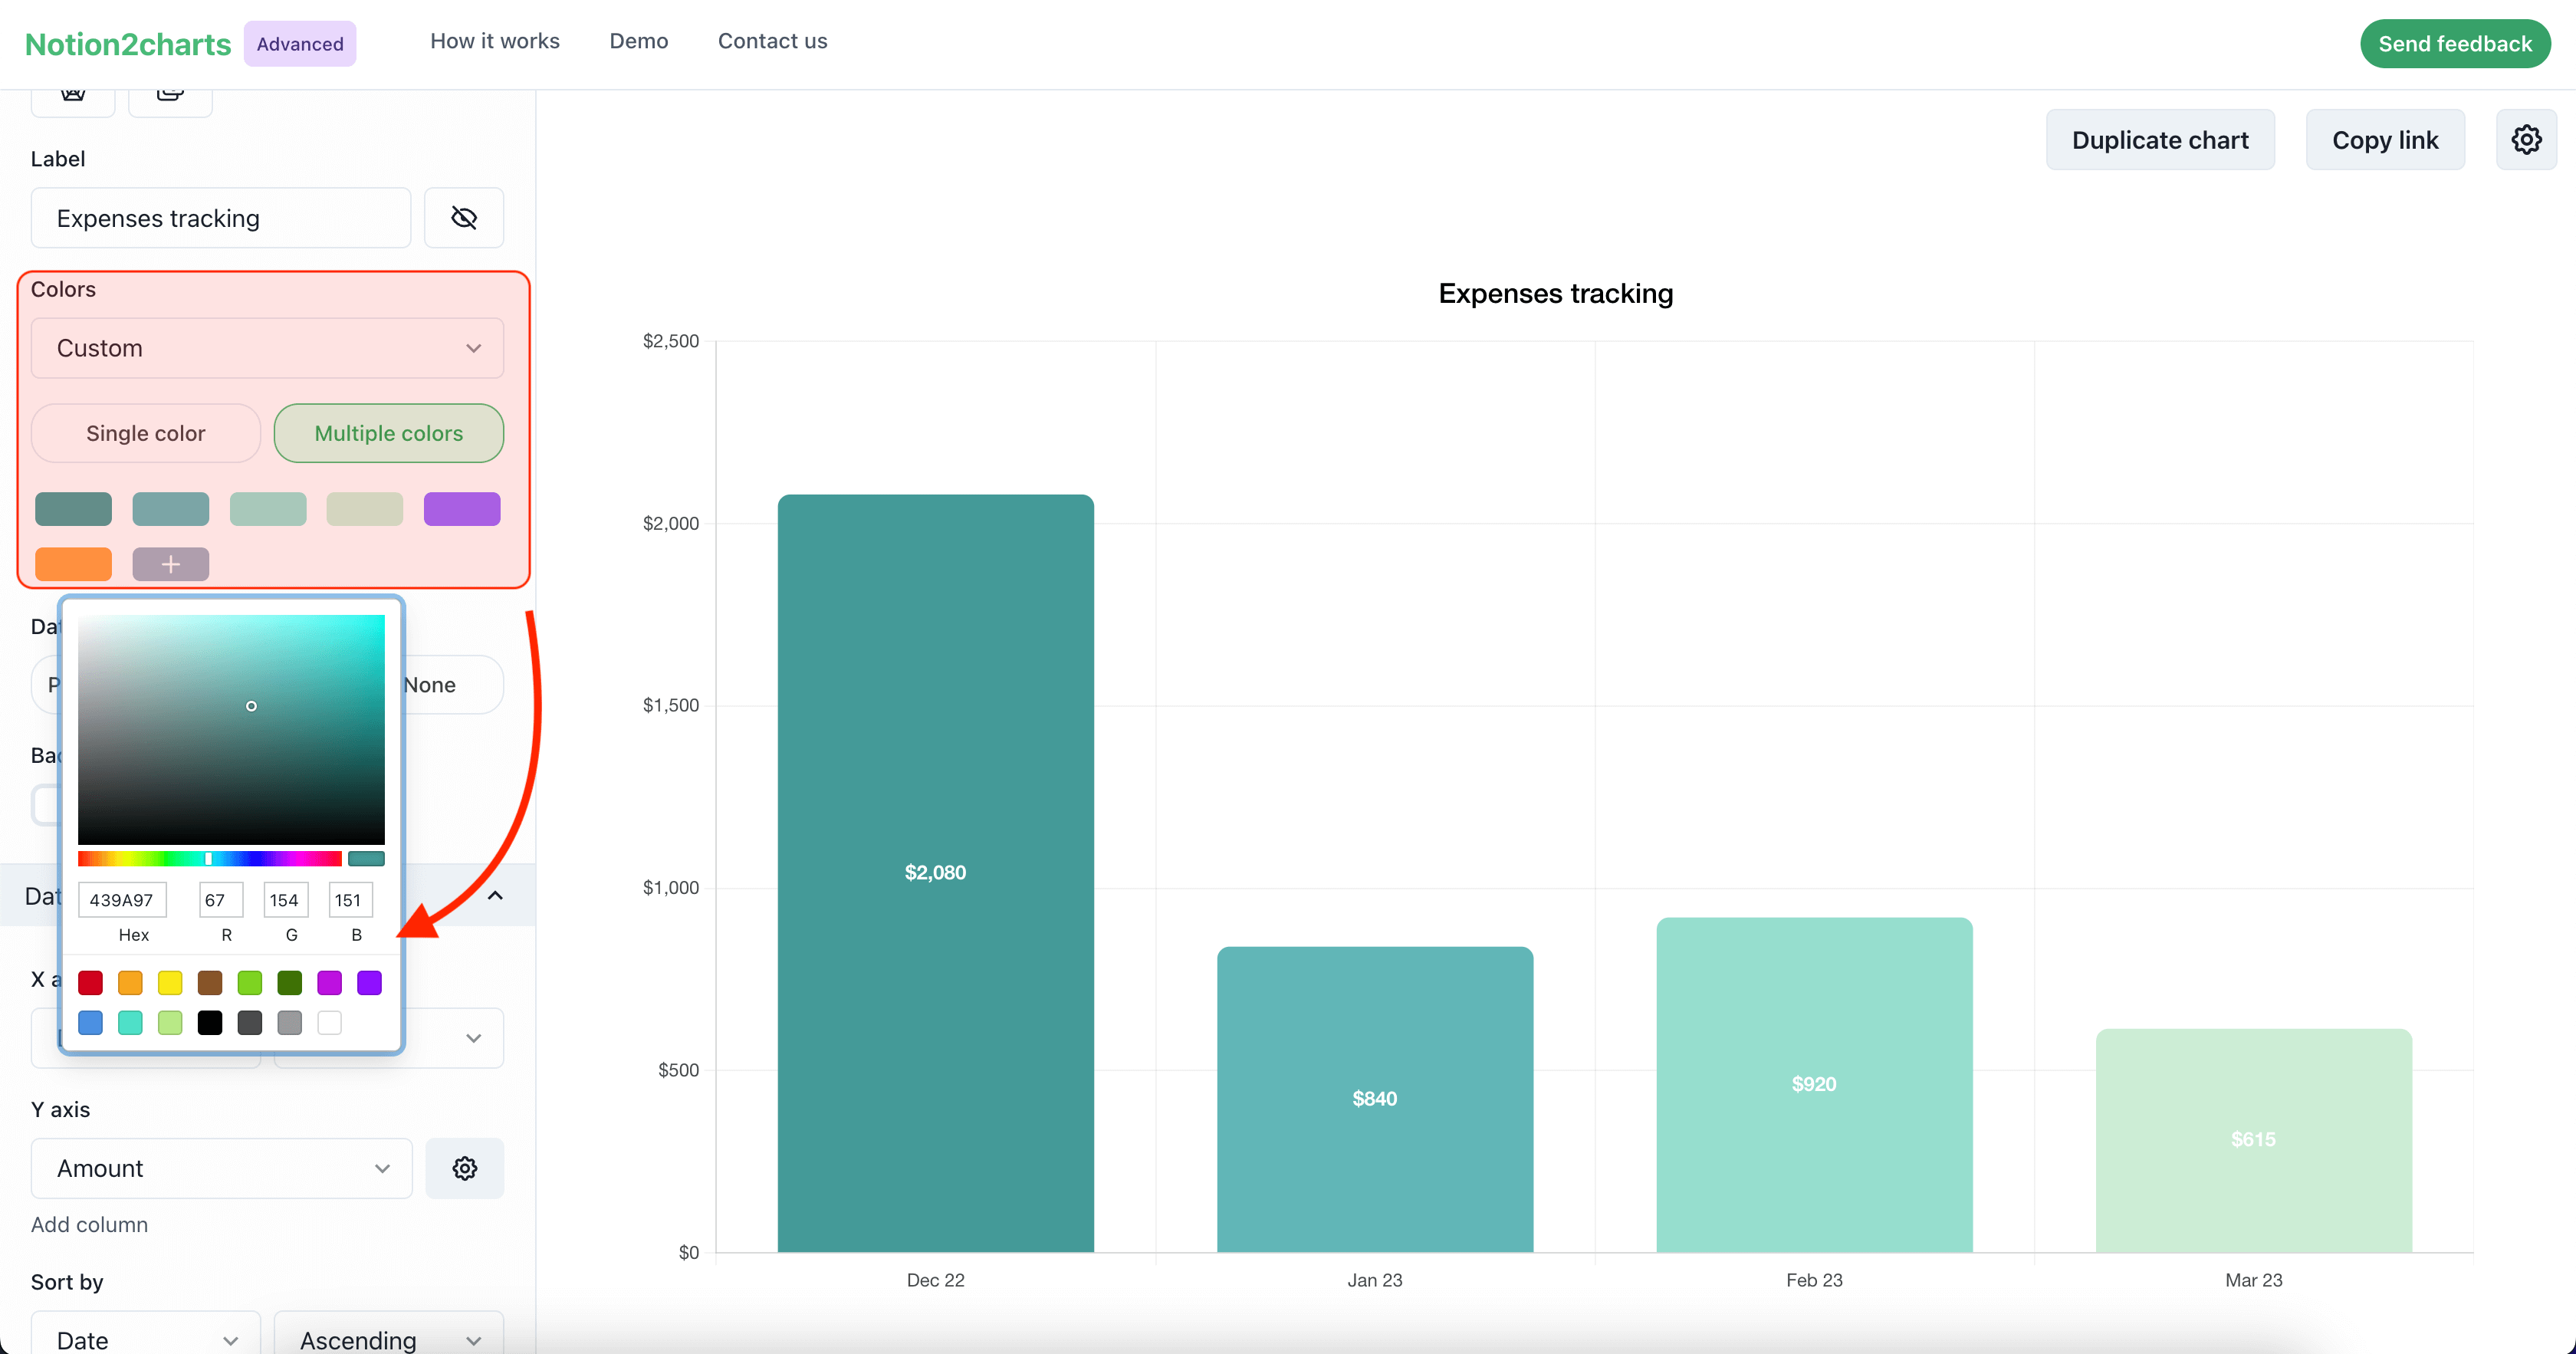 Customizing chart colors in Notion2Charts